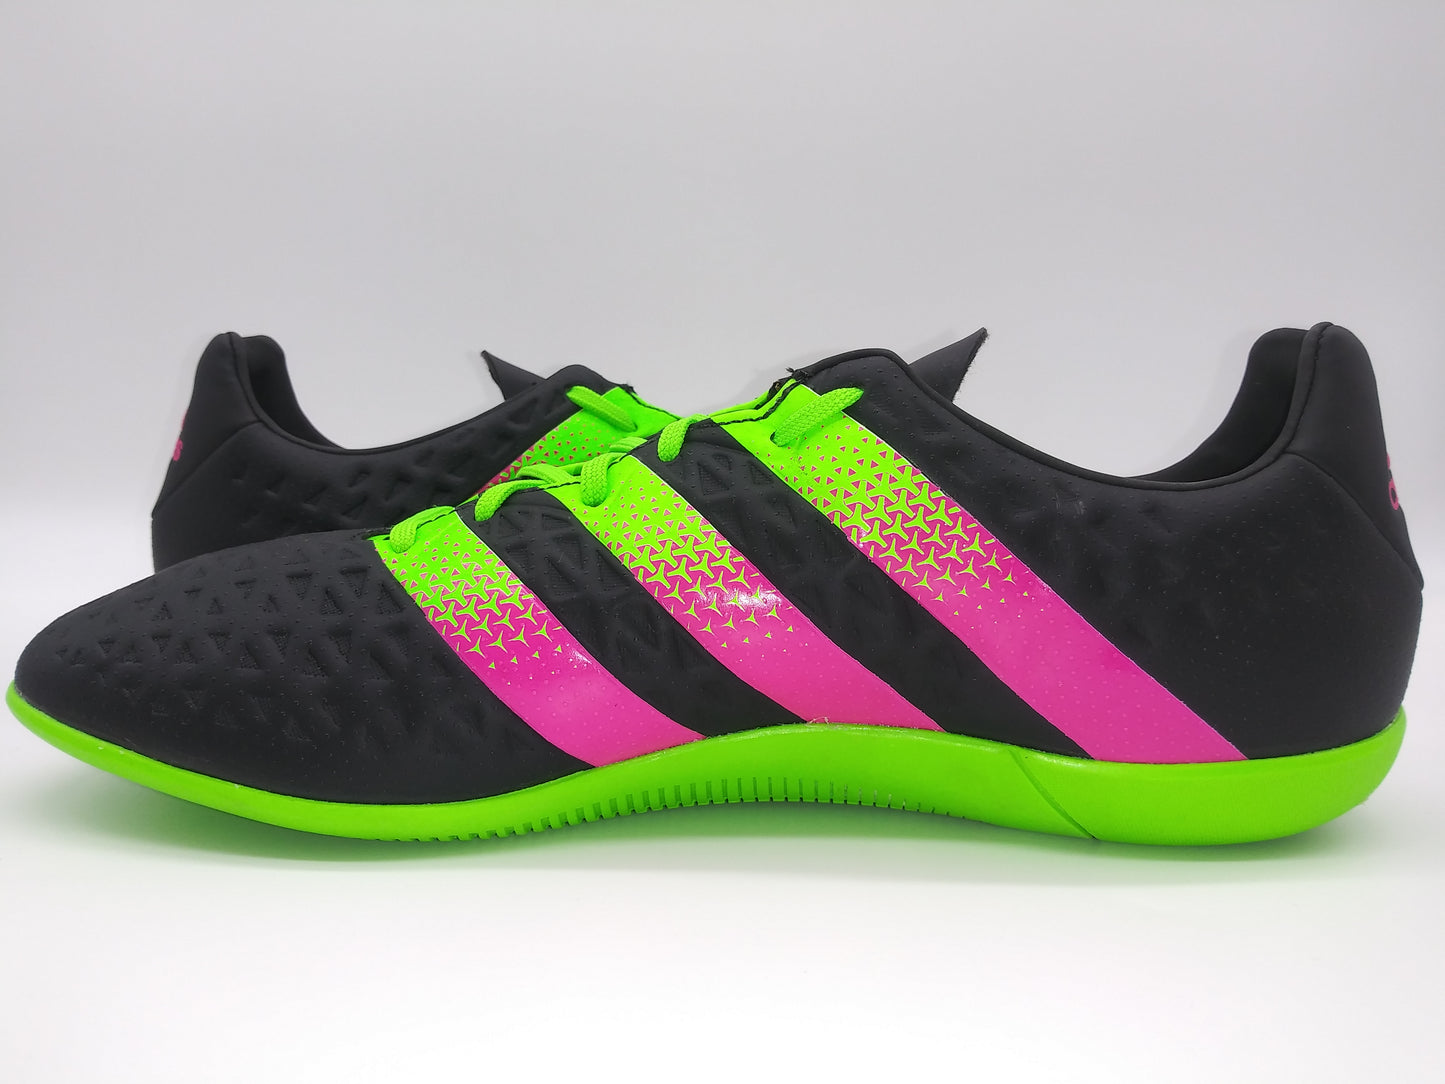 Adidas ACE 16.3 IN Black Green